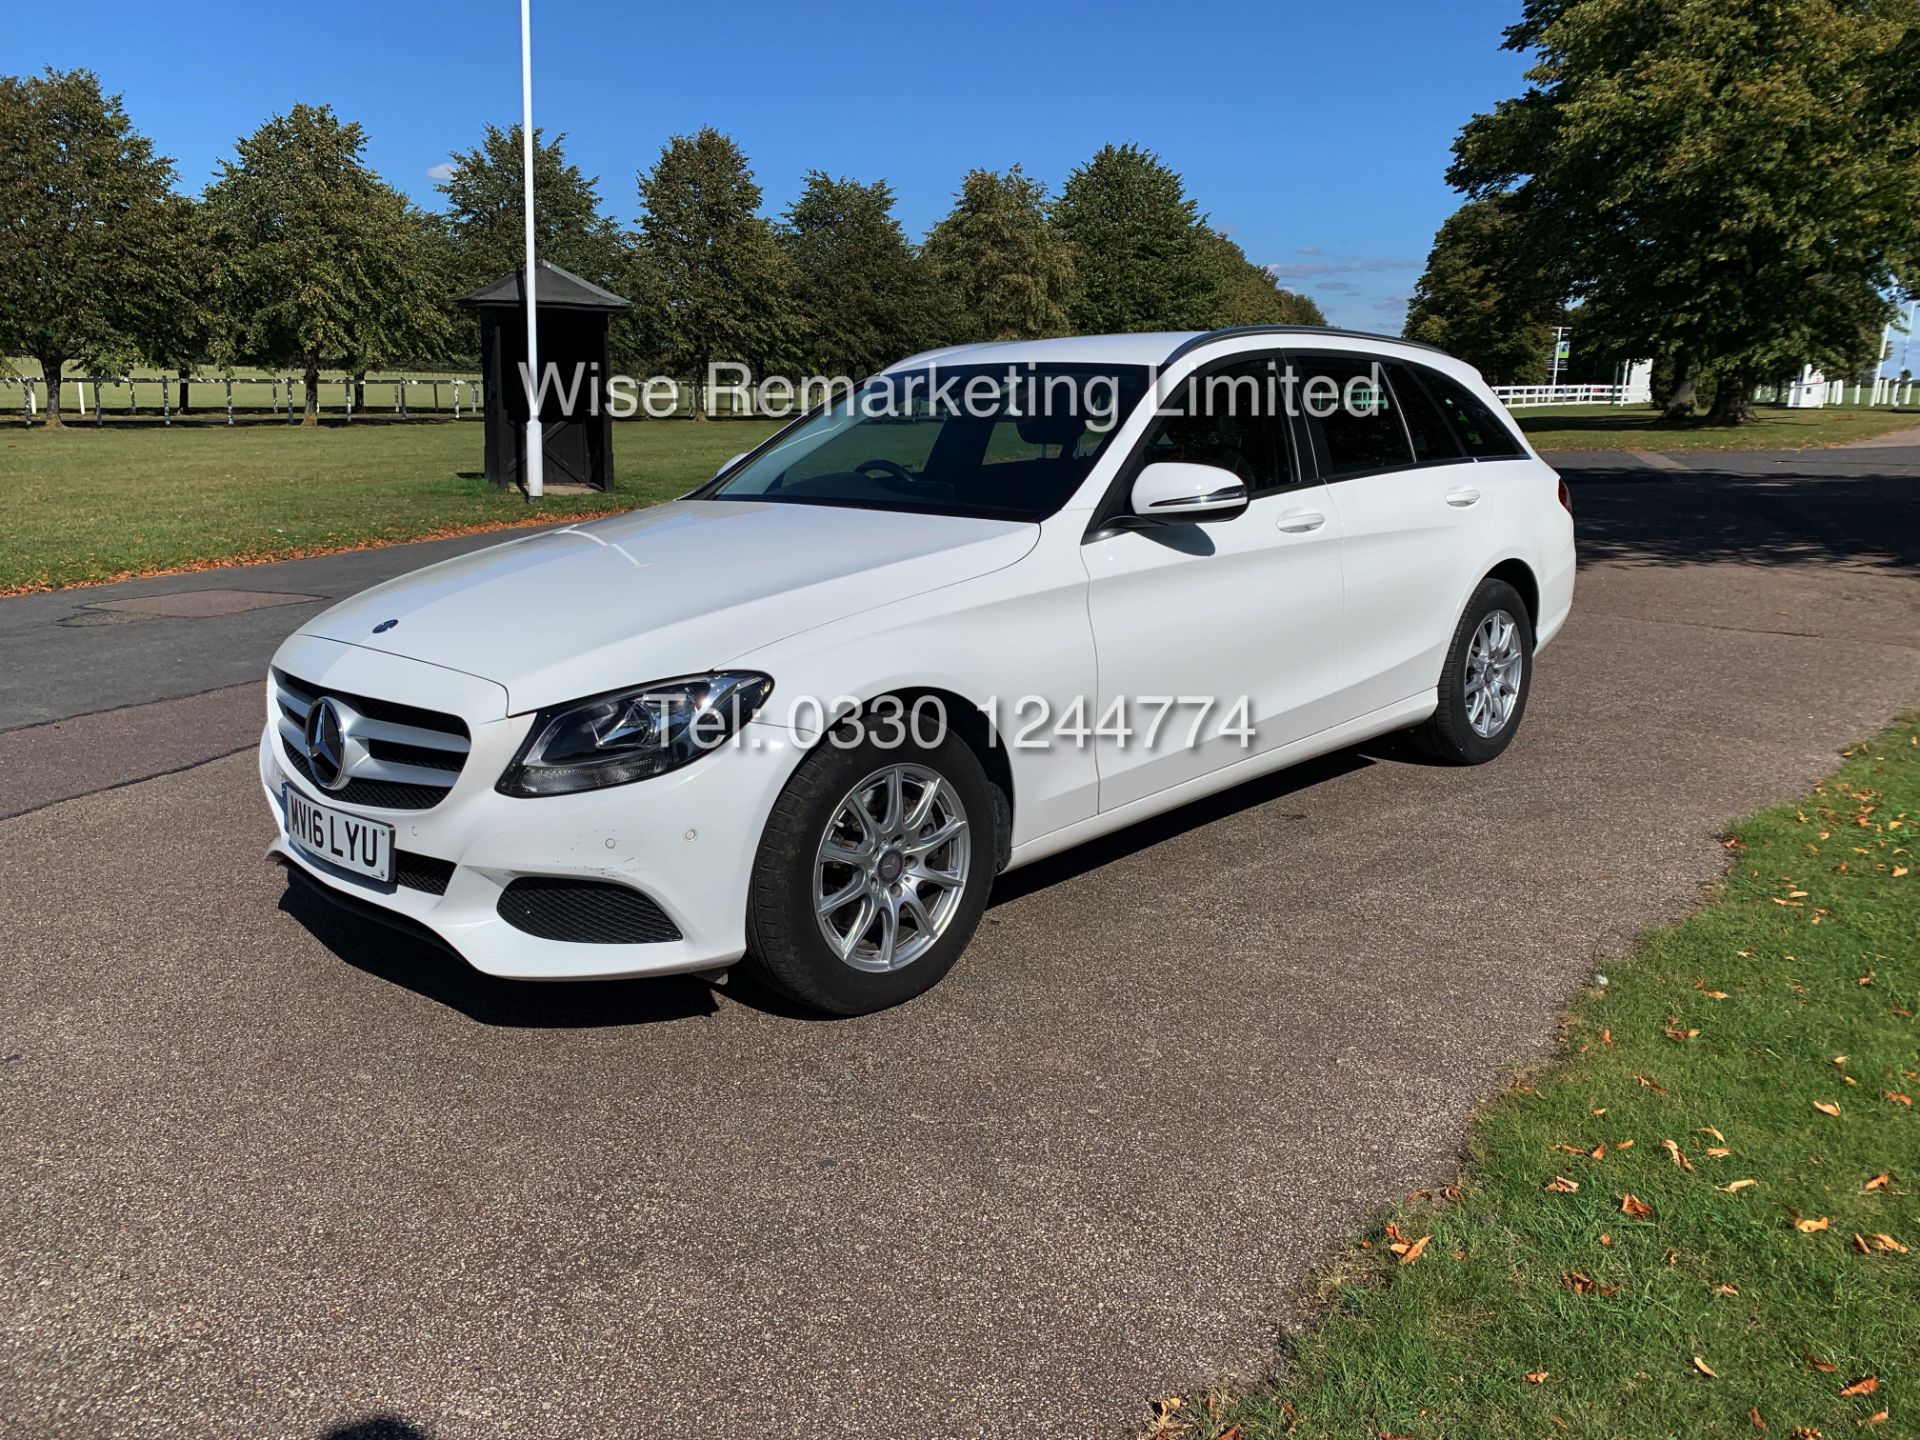 *Reserve Met* MERCEDES C CLASS C220d ESTATE SE EXECUTIVE (2016) **WHITE** 1 KEEPER FROM NEW - Image 2 of 32